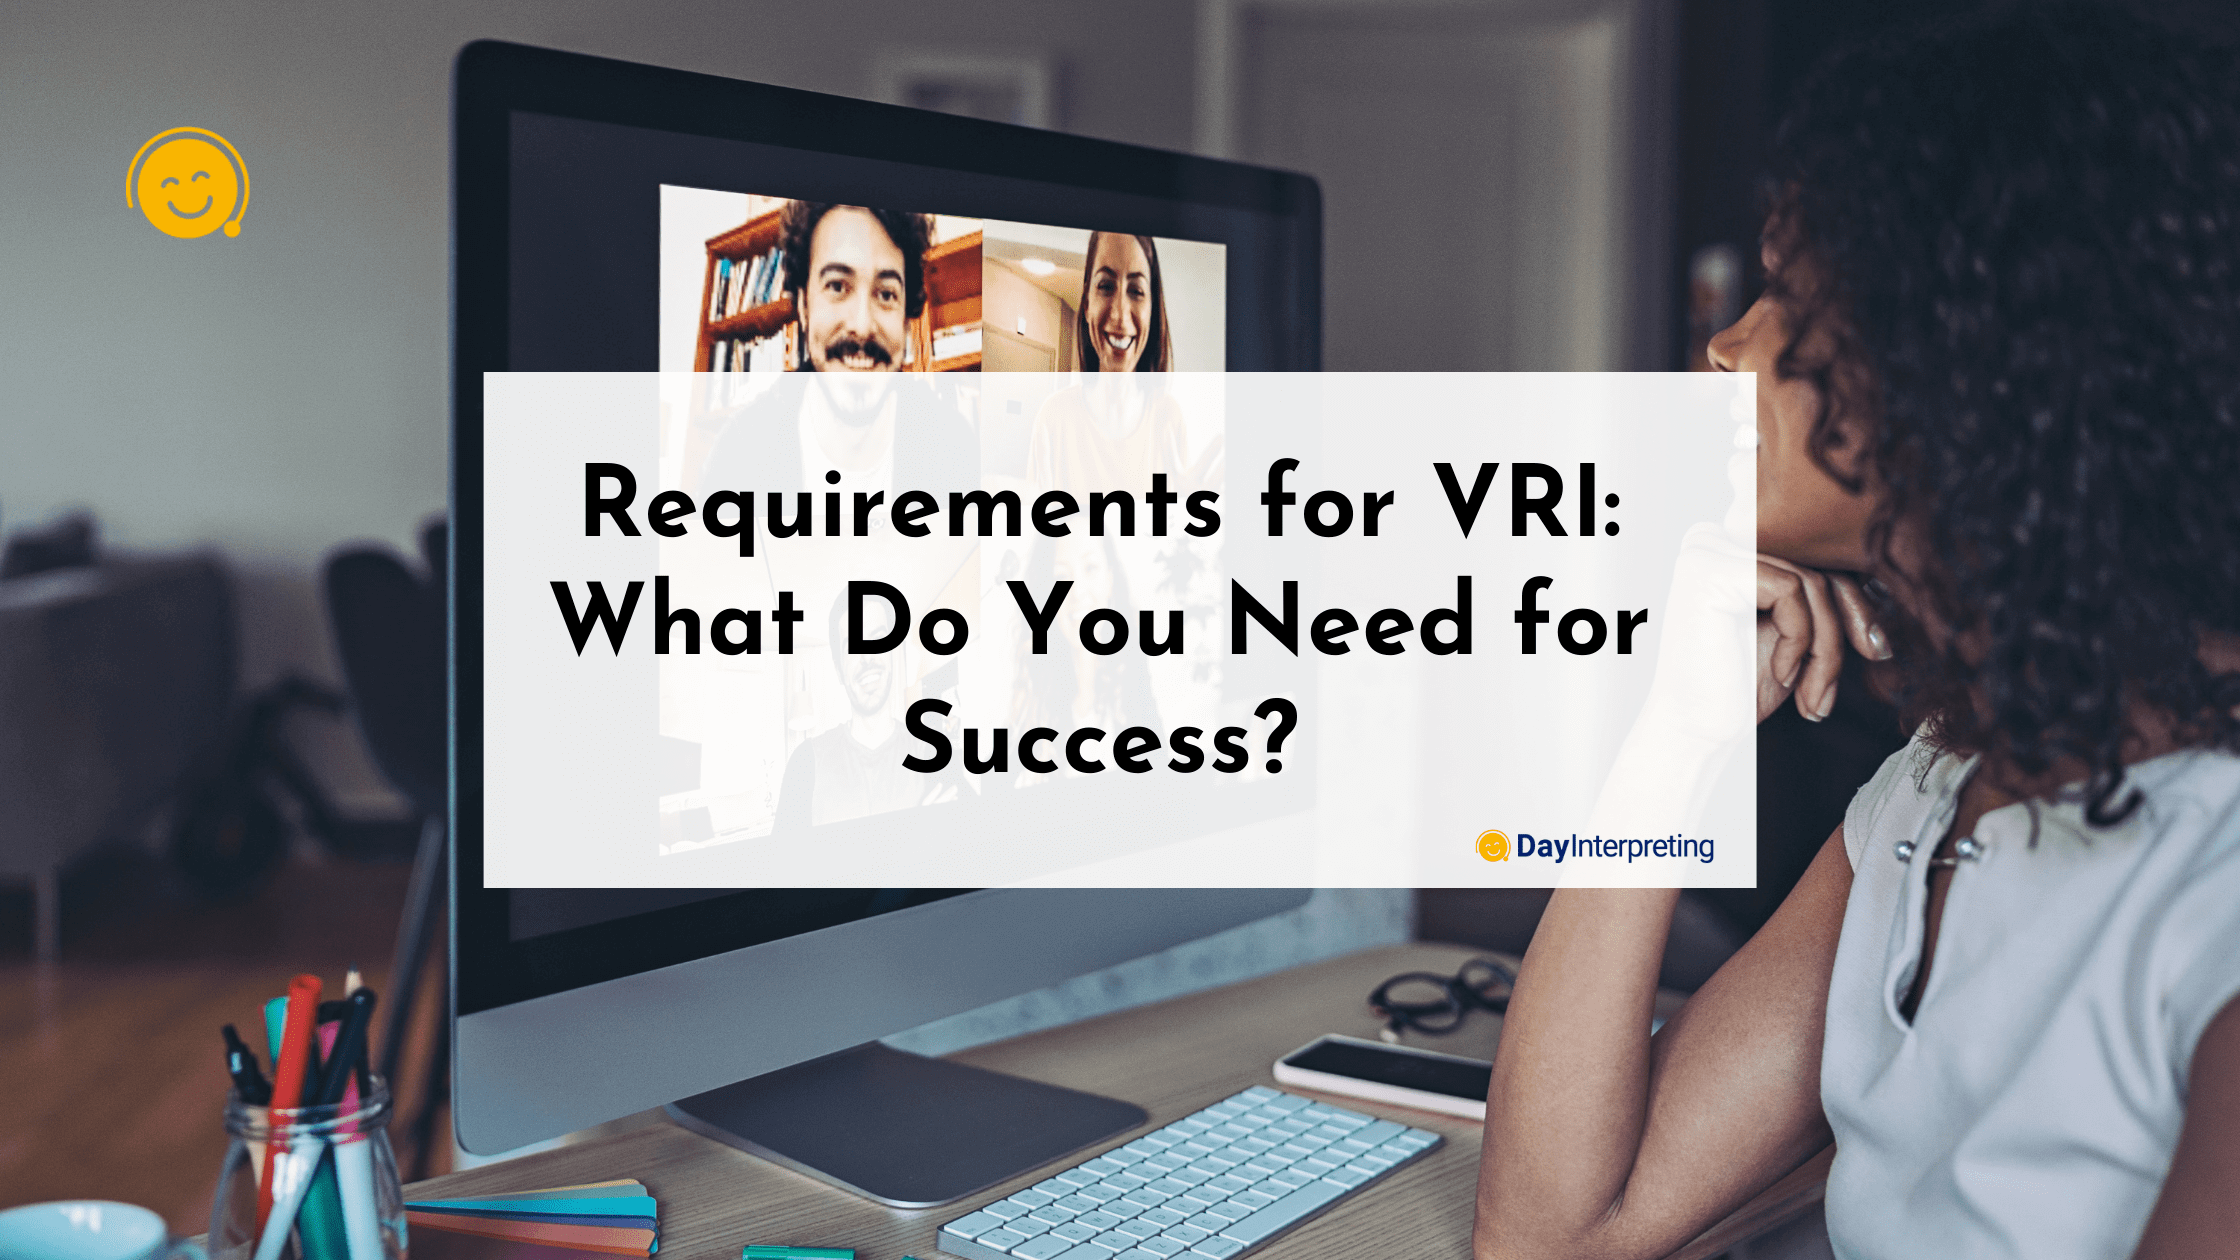 Requirements for VRI: What Do You Need for Success?